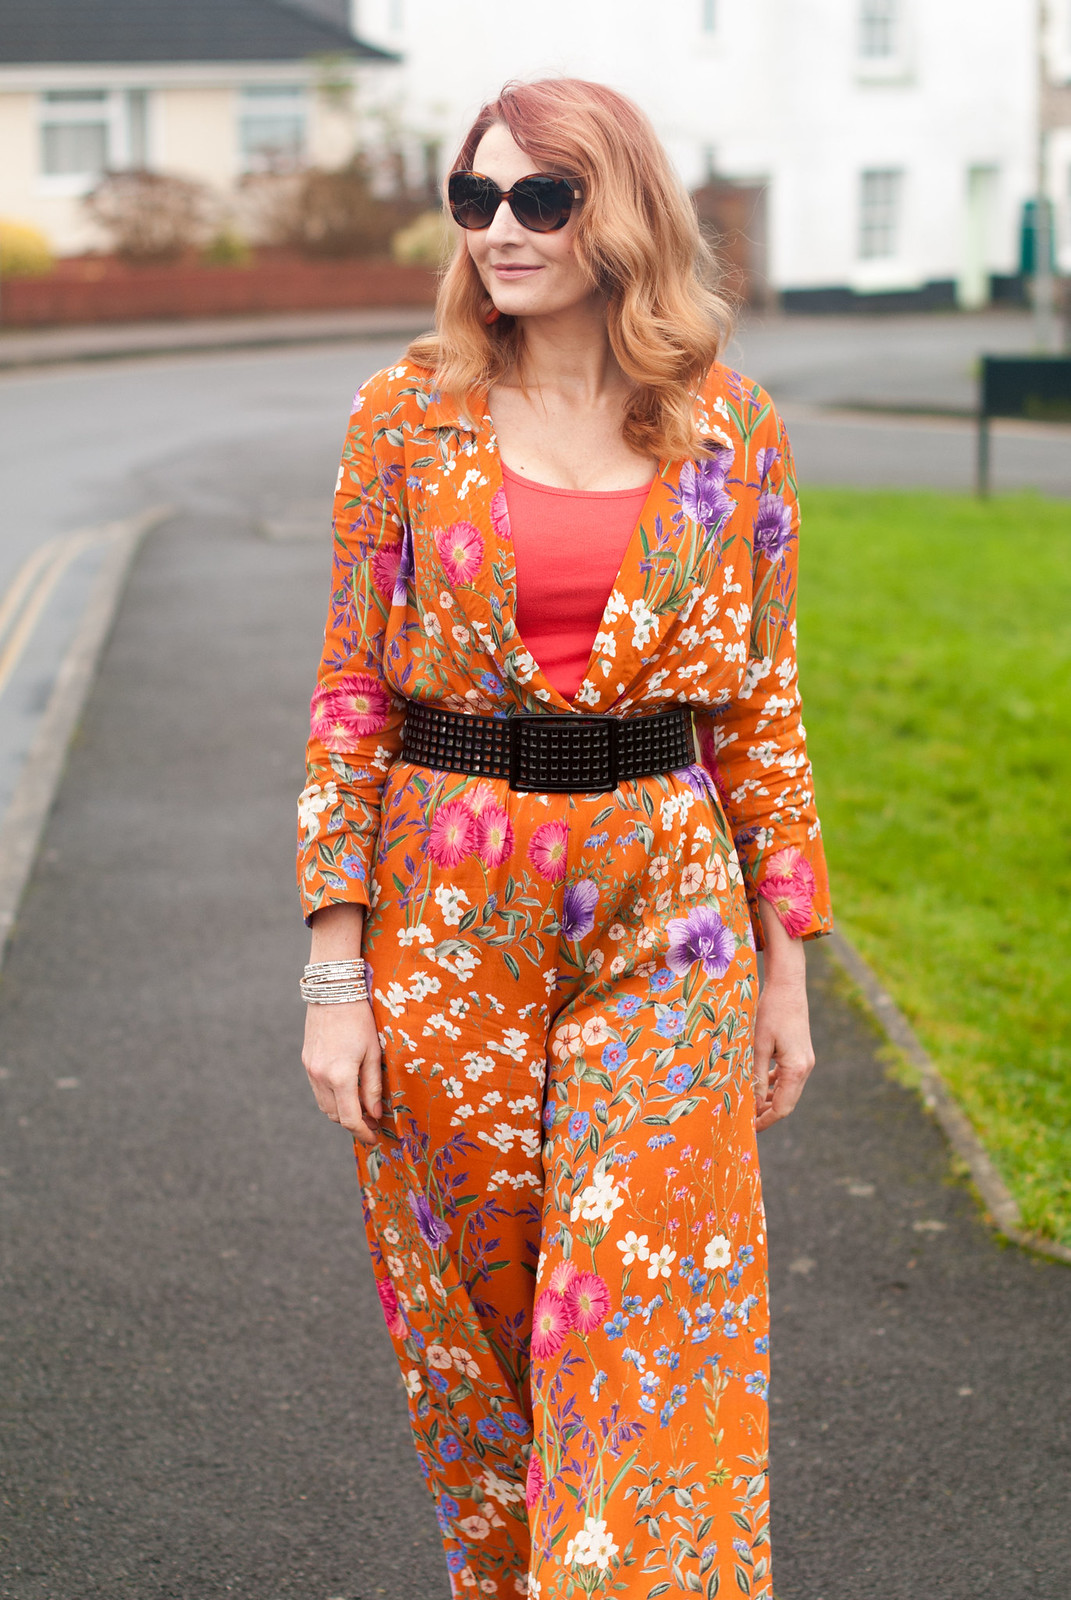 Wearing Florals in Winter: Wide leg orange floral jumpsuit from Mango with black accessories | Not Dressed As Lamb, over 40 fashion and style